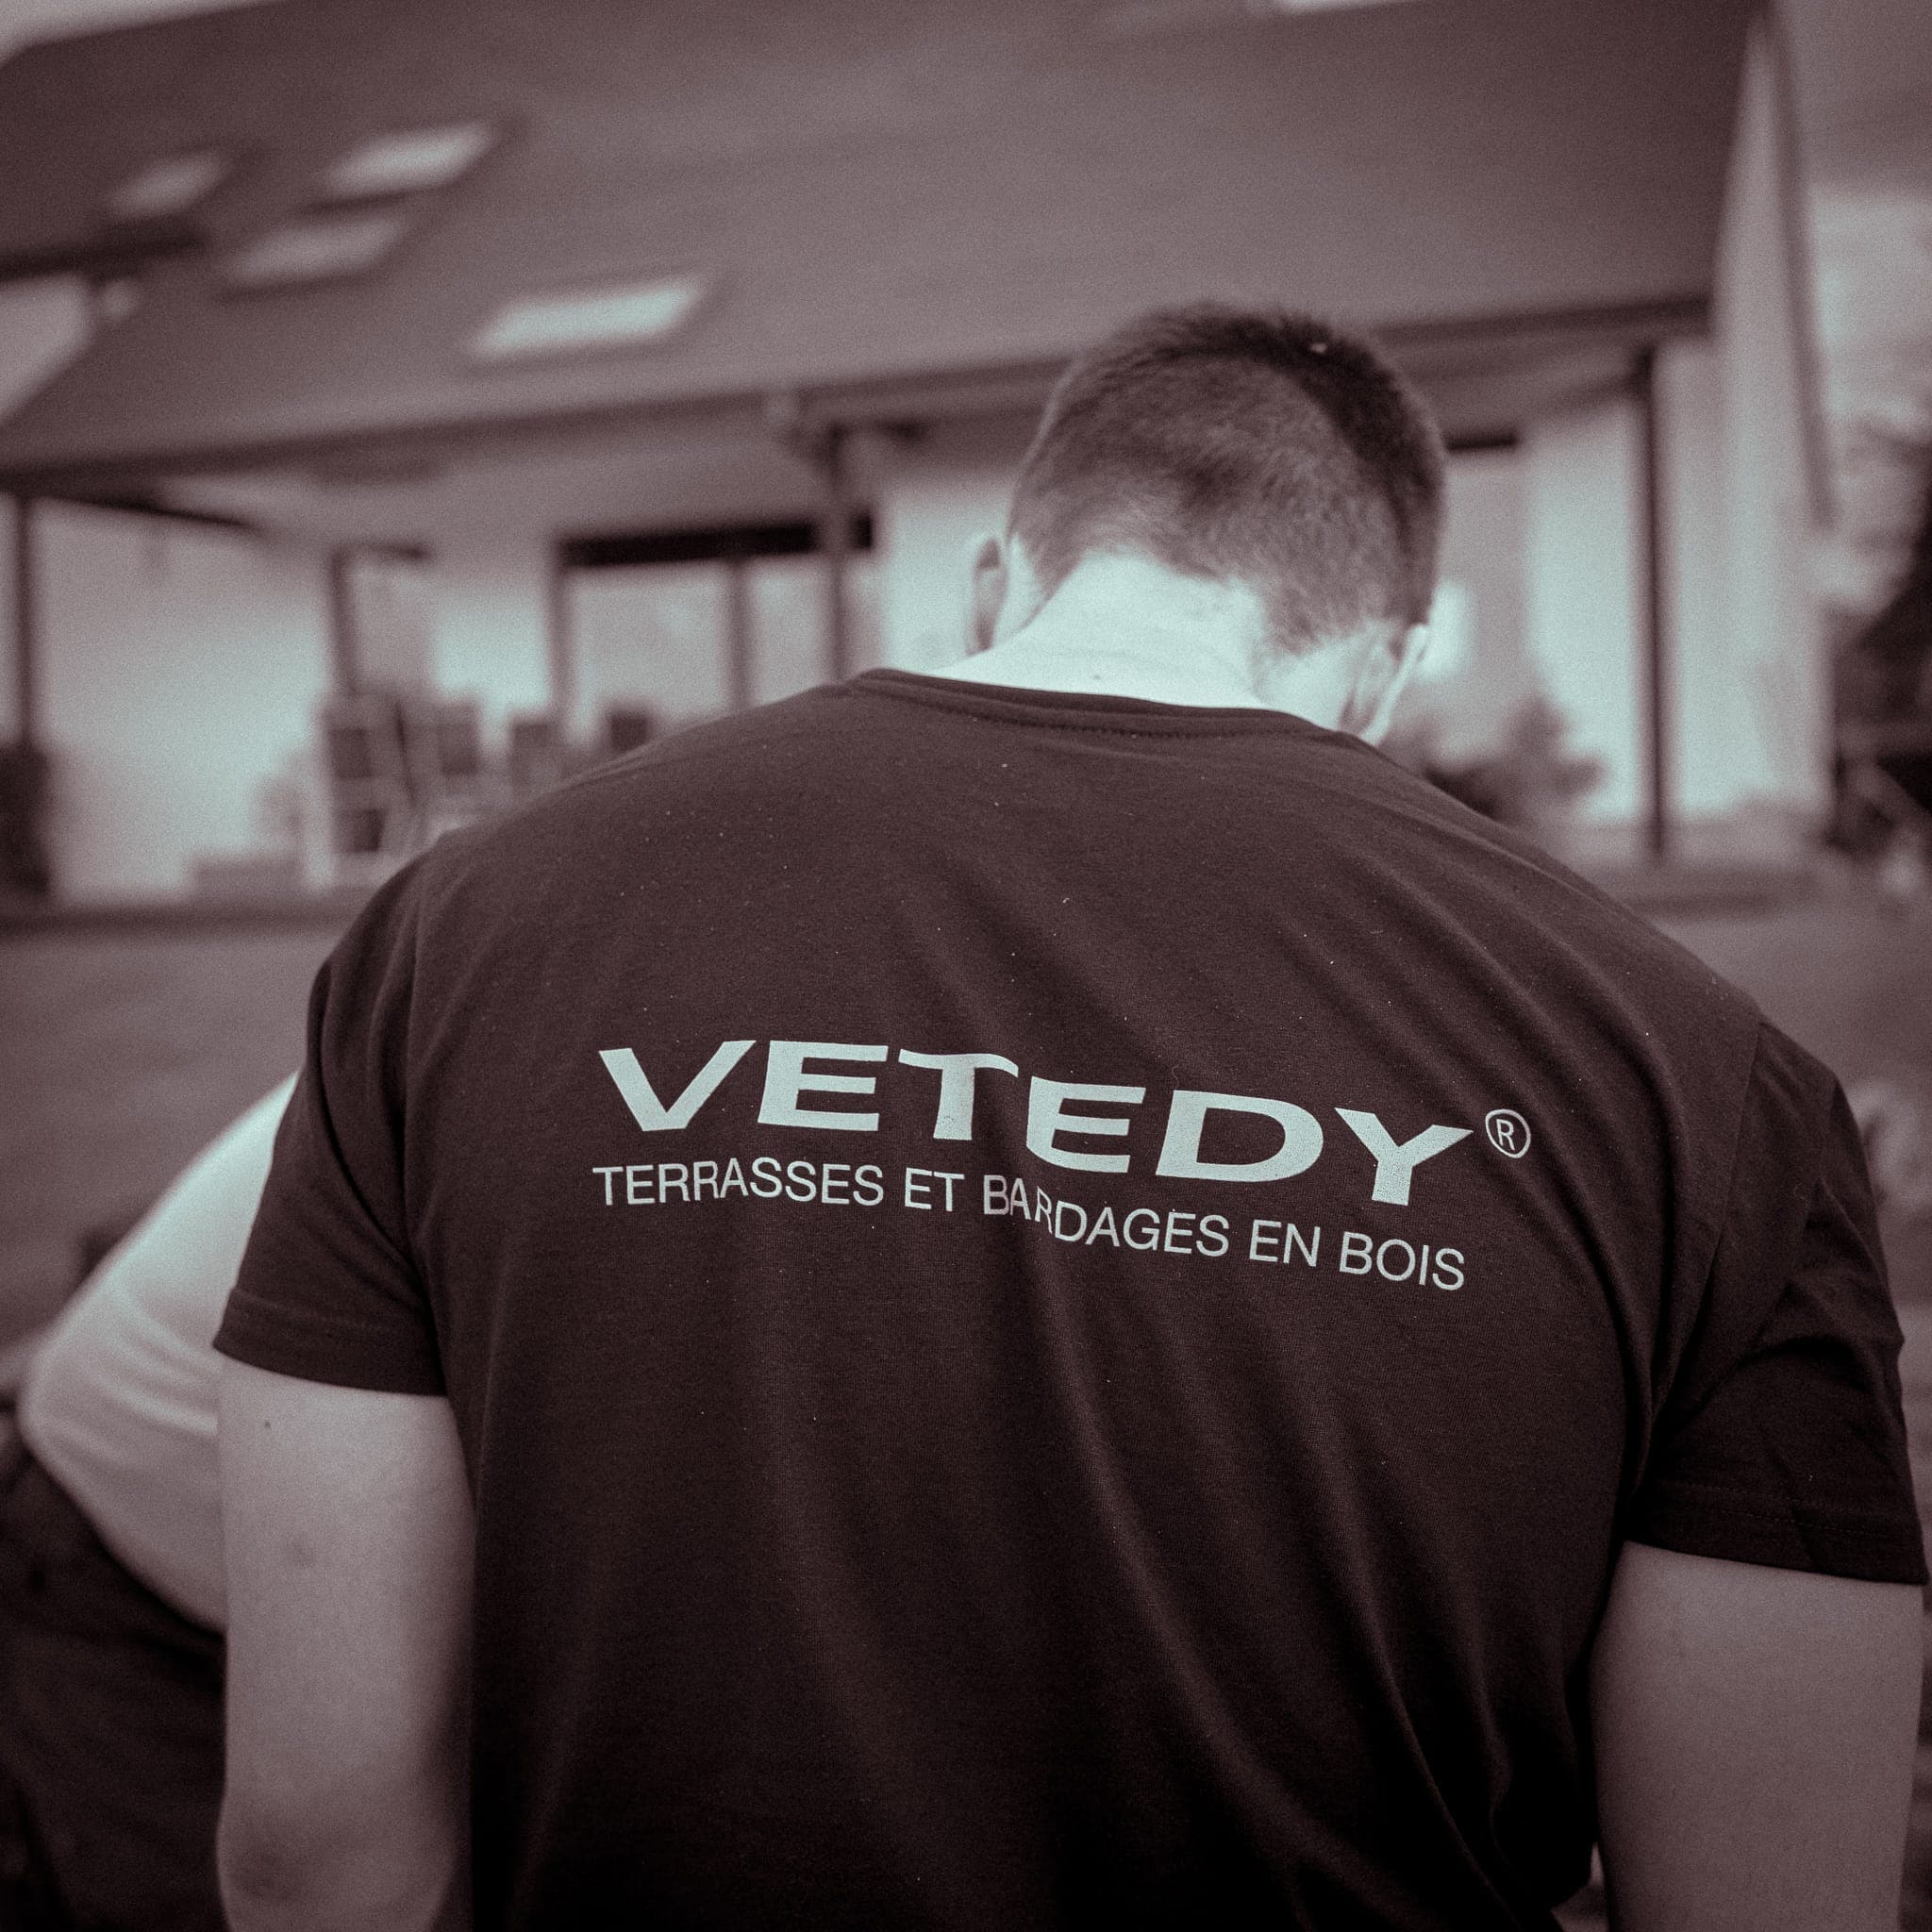 Vetedy is a manufacturer of high quality wood decking and cladding systems